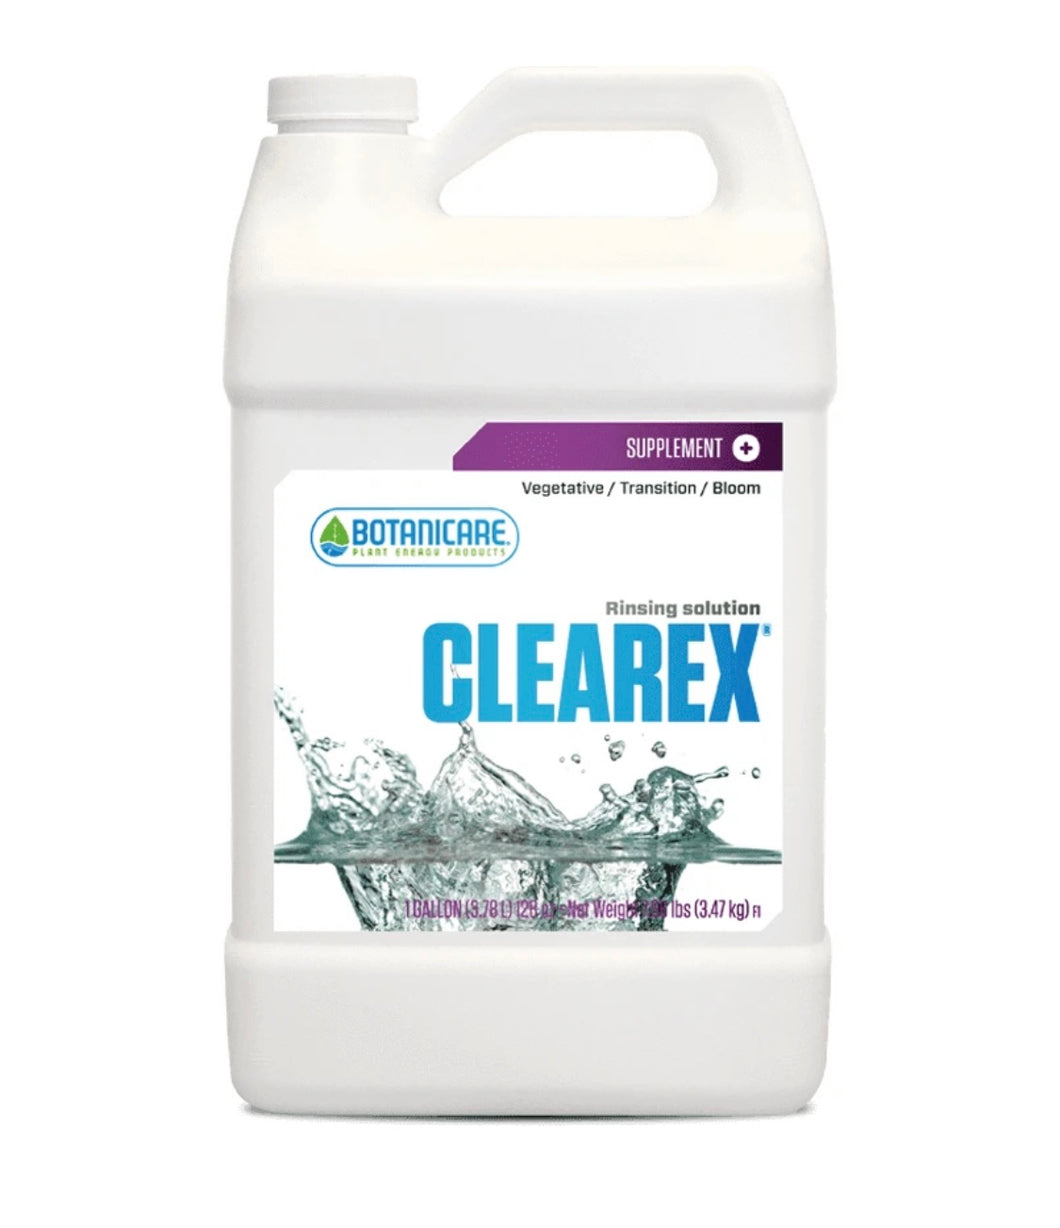 Botanicare Rinsing Solution Clearex